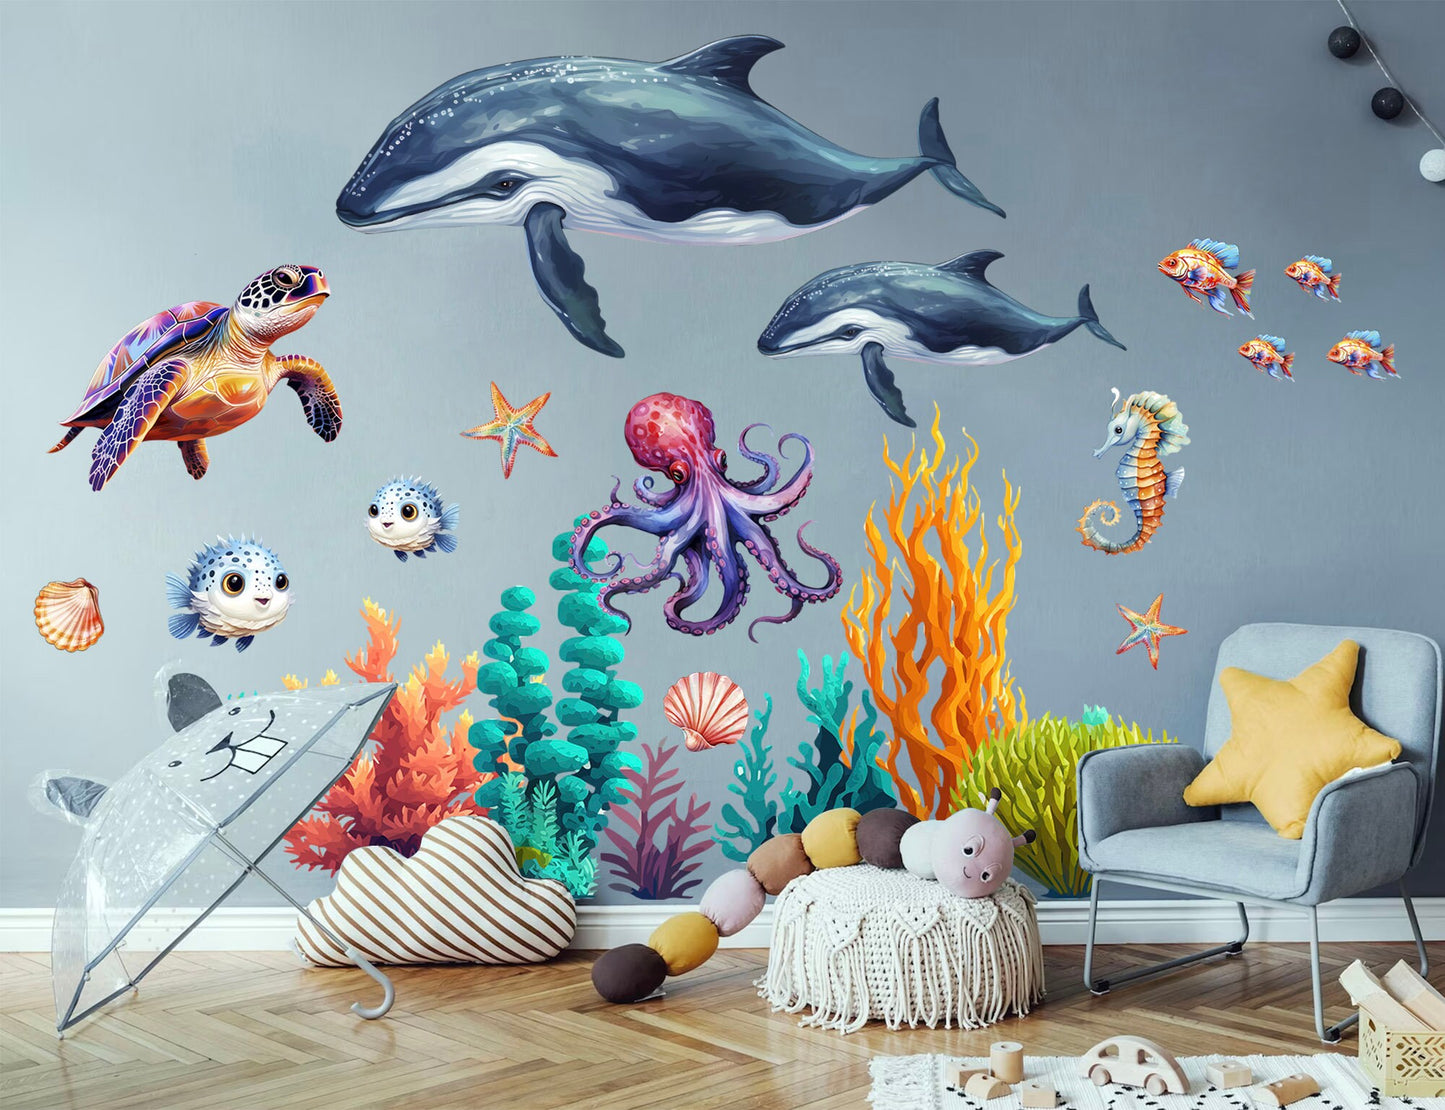 Enchanting Ocean Life Cartoon Wall Decal - Whale Ray Turtle Octopus Corals Seaweed - Perfect for Kids Room Decor - BR441